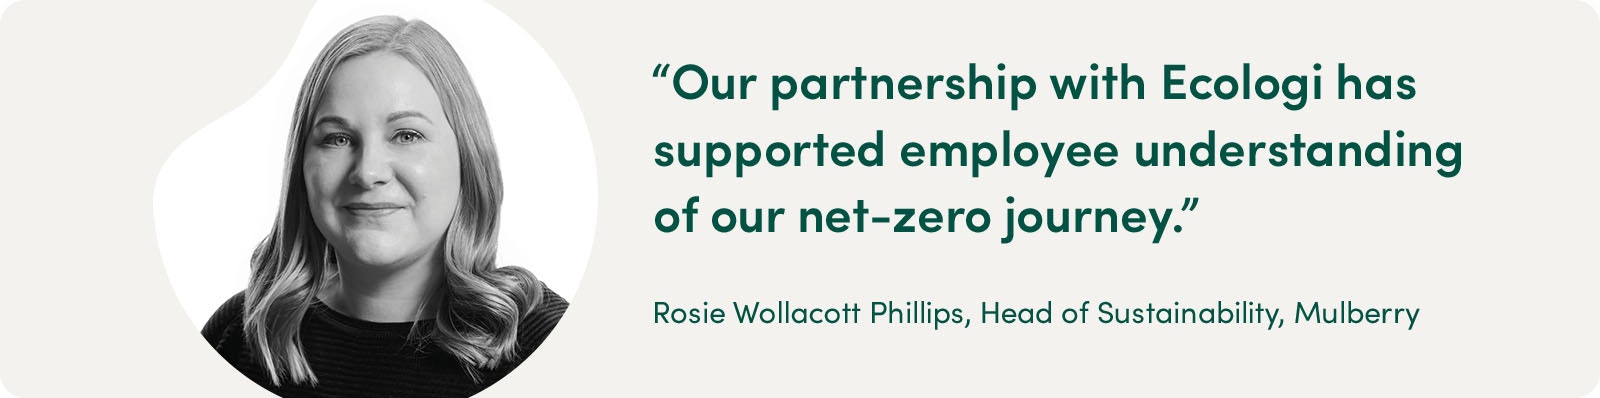 "Our partnership with Ecologi has supported employee understanding of our net-zero journey"